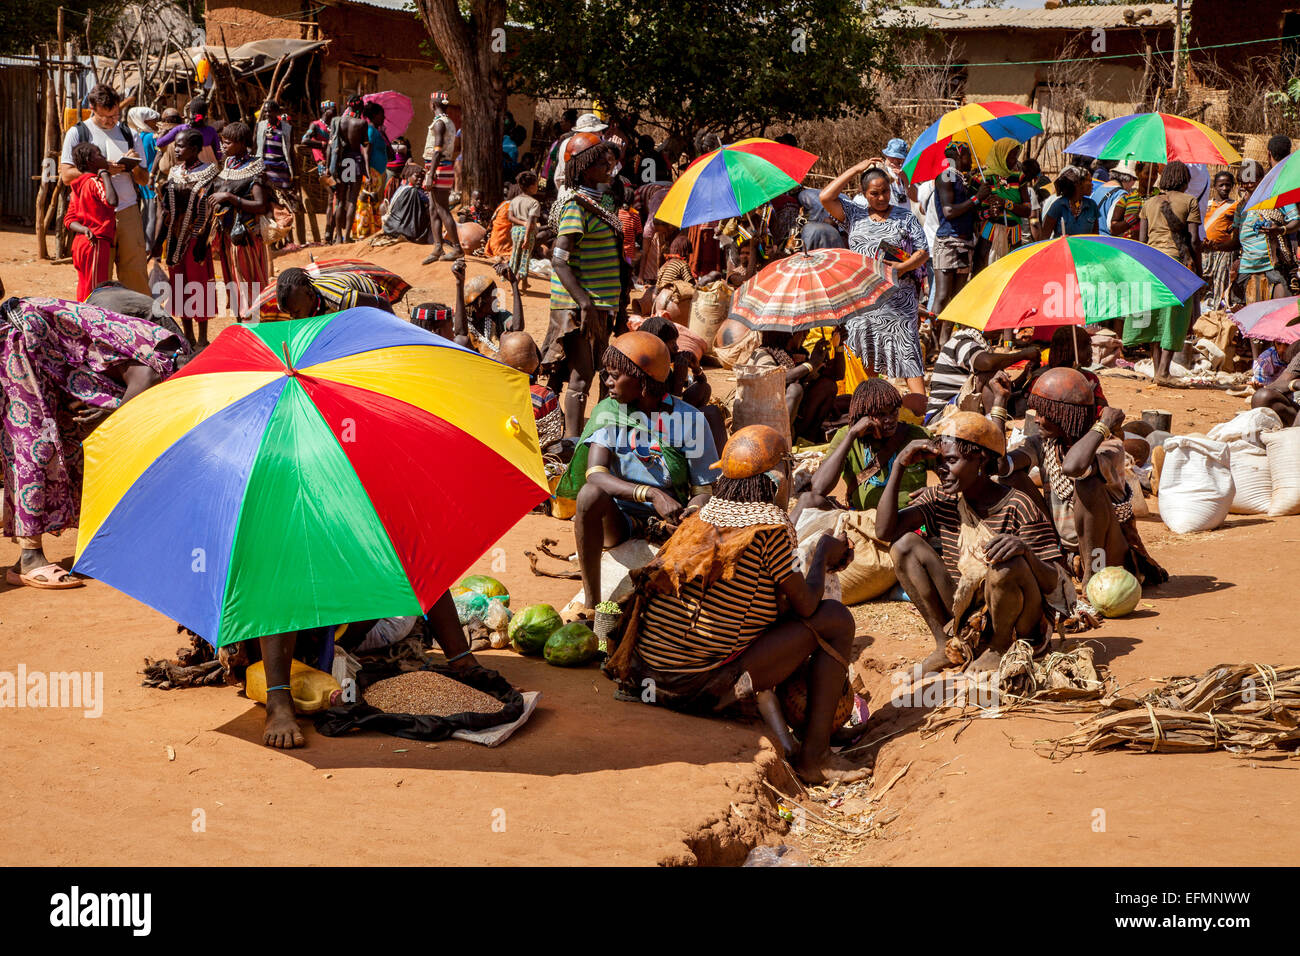 Banna Tribes People At The Key Afer Thursday Market, The Omo Valley, Ethiopia Stock Photo